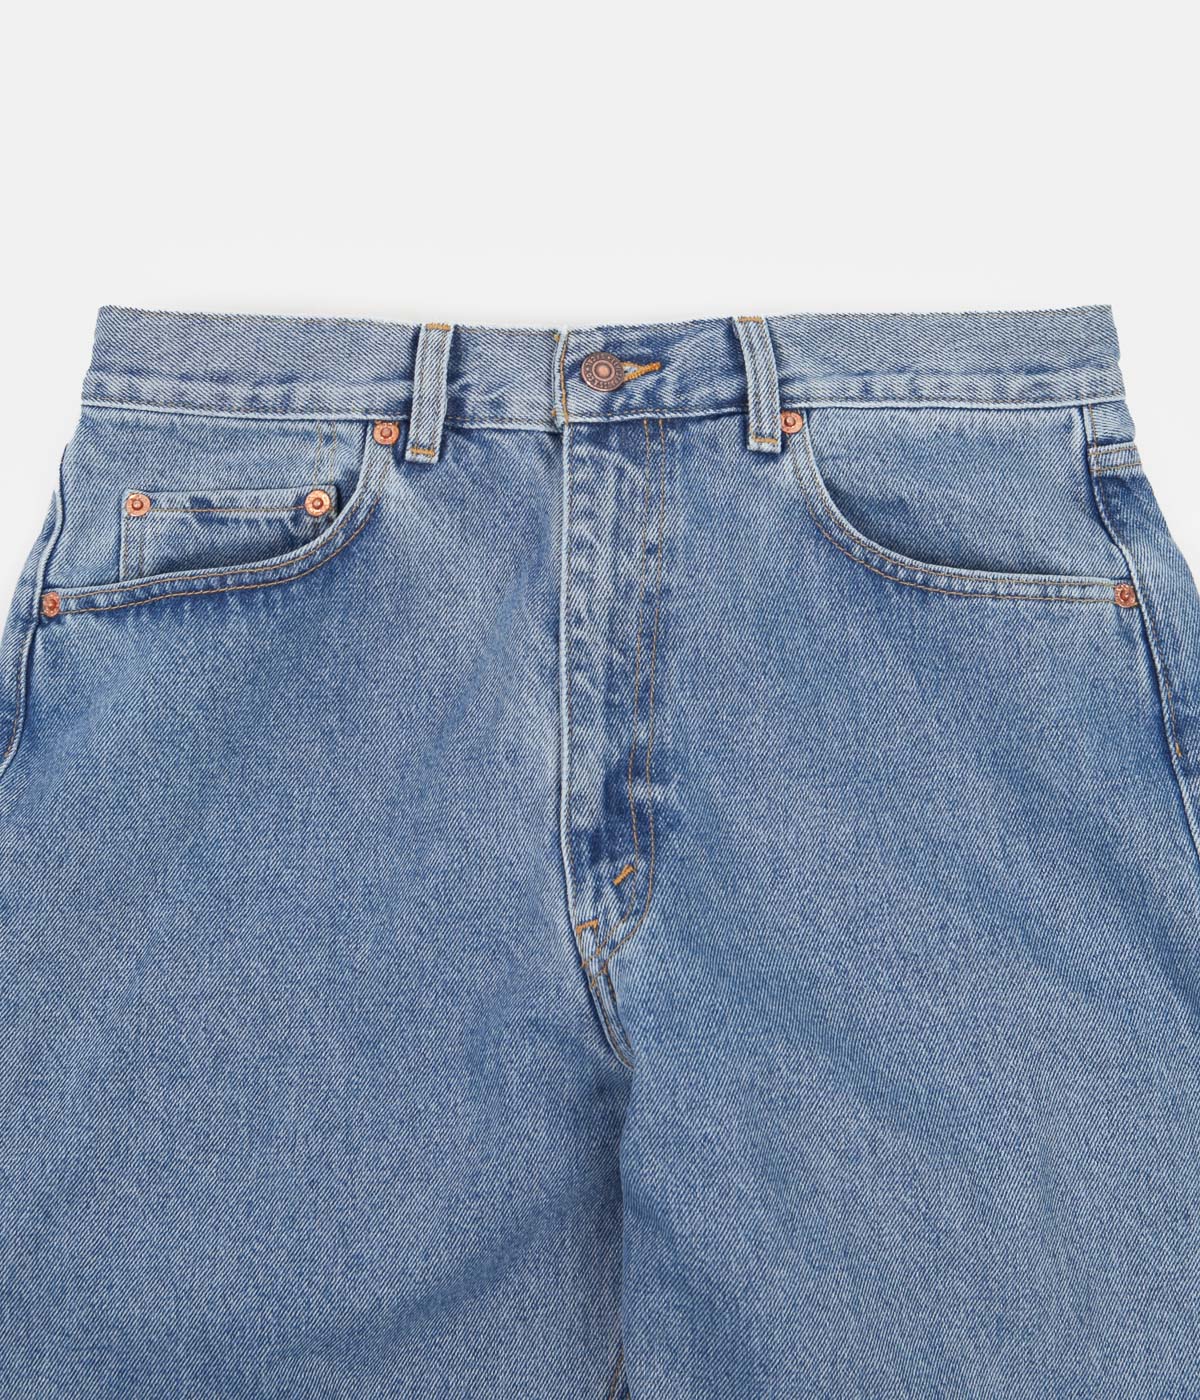 Levi's® Vintage Clothing 554 Relaxed Jeans - 80s Bright Stone